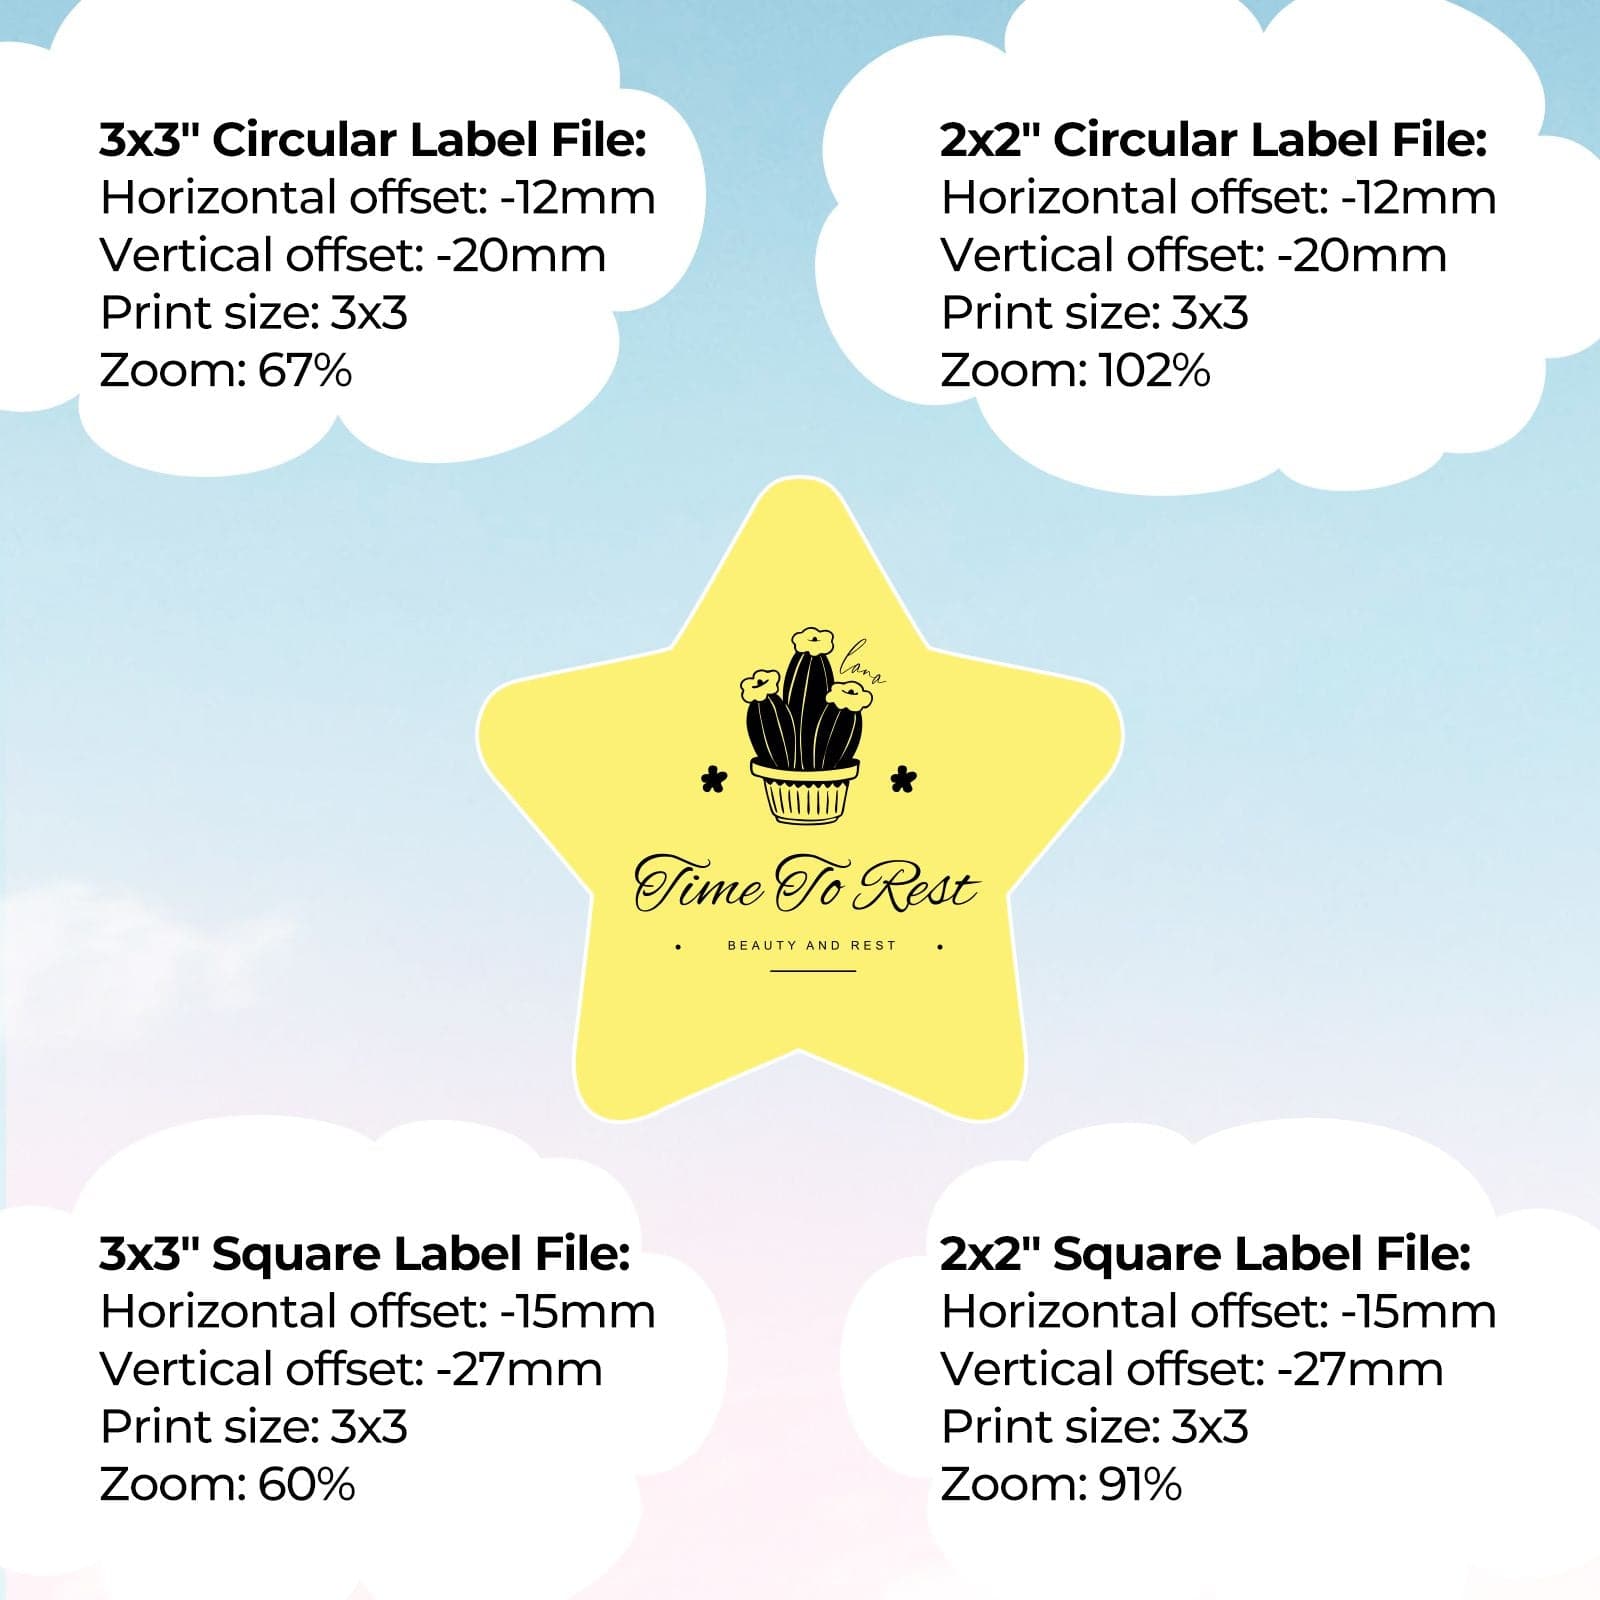 Guidelines for personalized printing star labels at home.